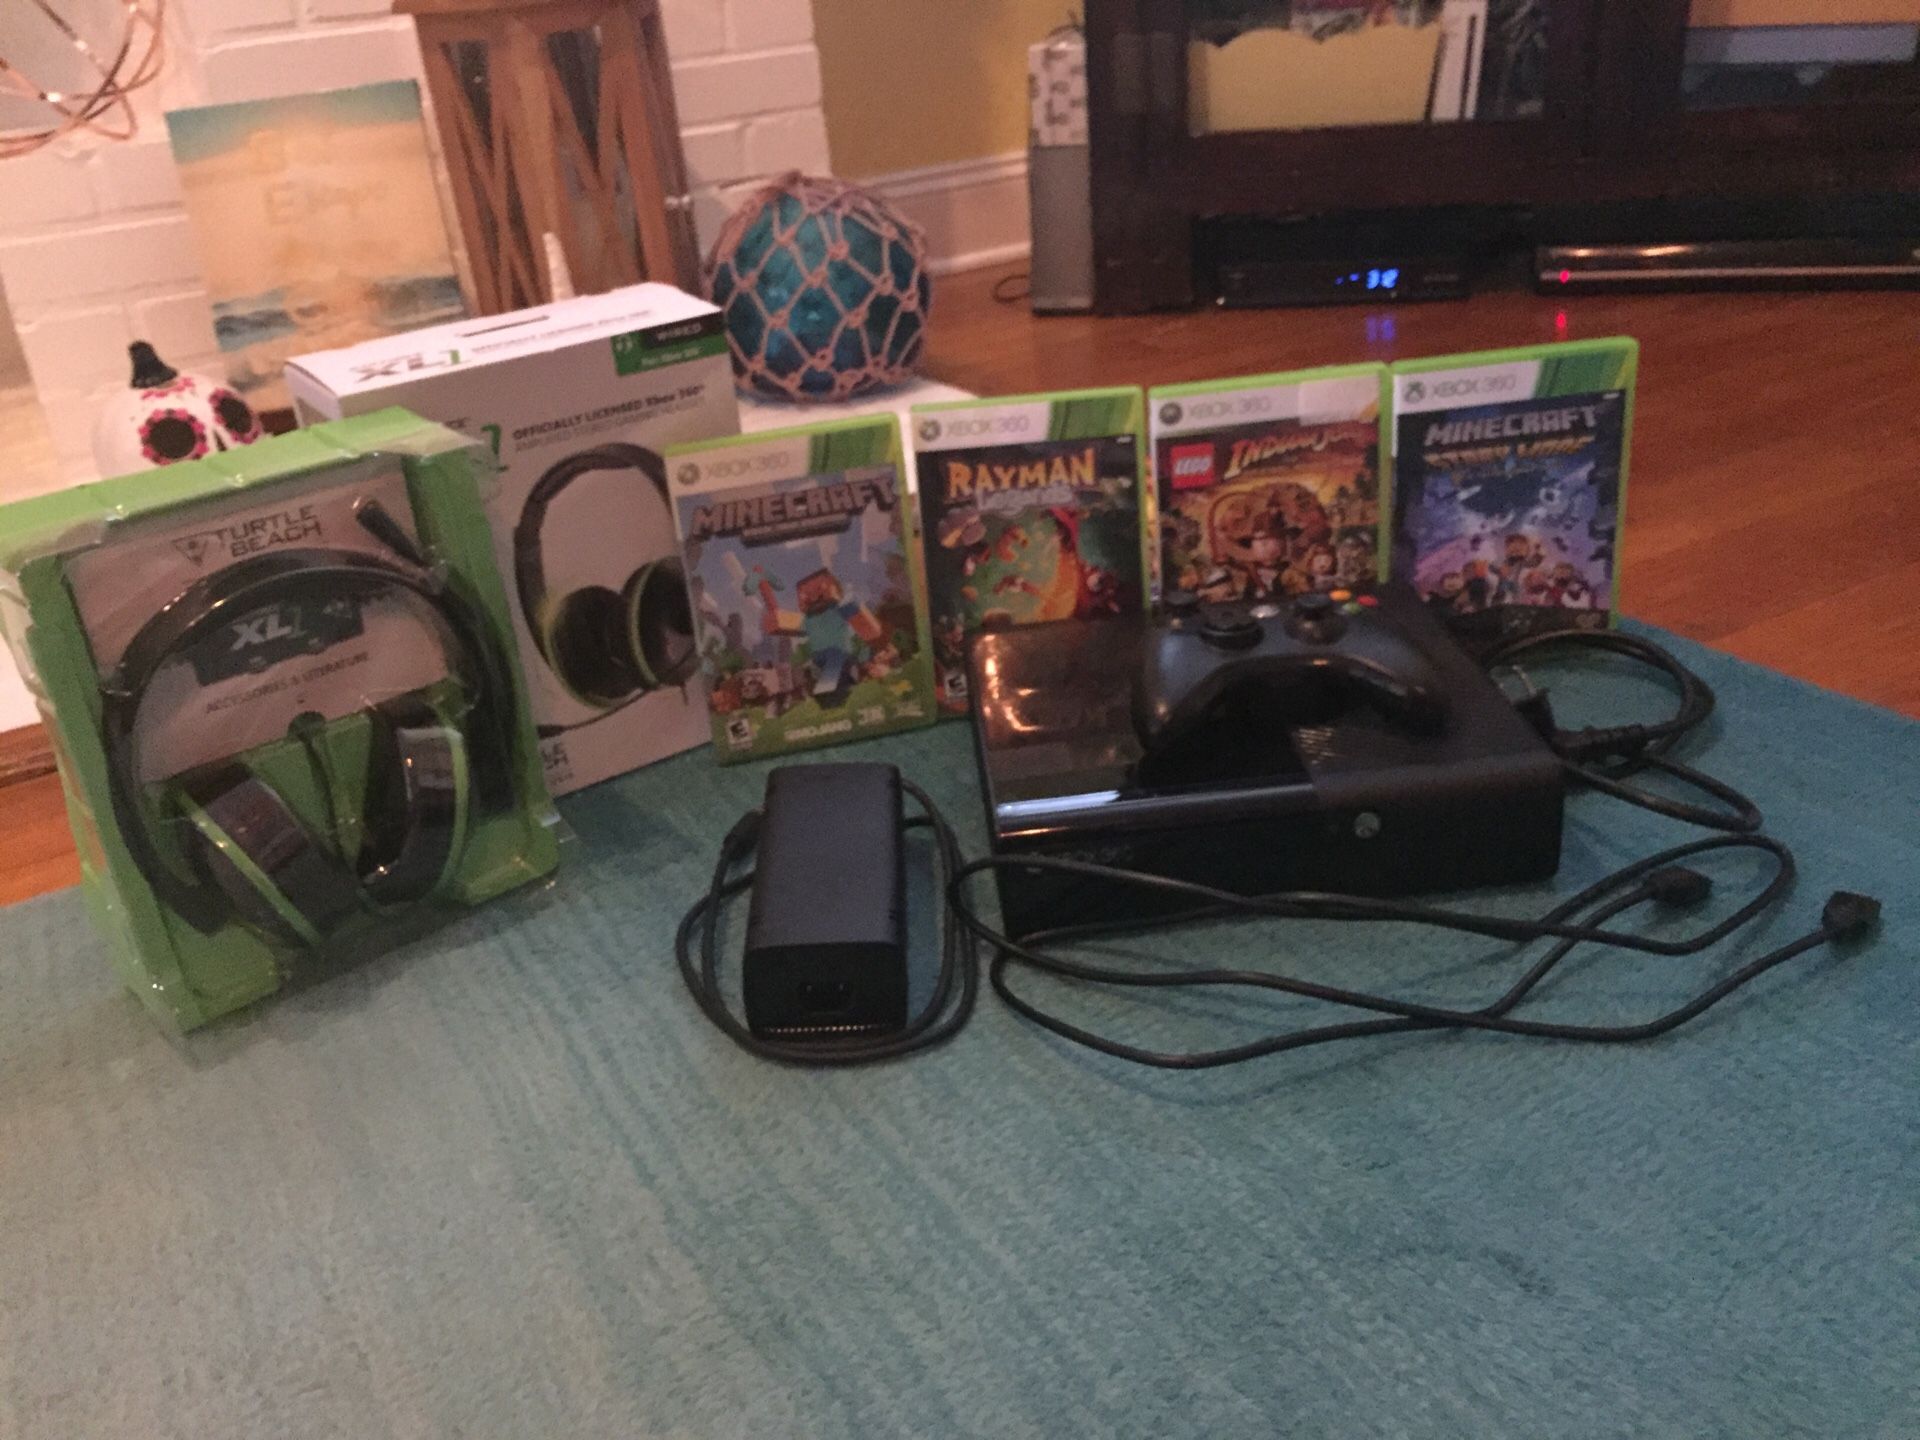 Good condition Xbox 360, Xbox 360 controller, 4 Xbox 360 games, and Turtle Beach Ear Forces XL1 wired headsets.